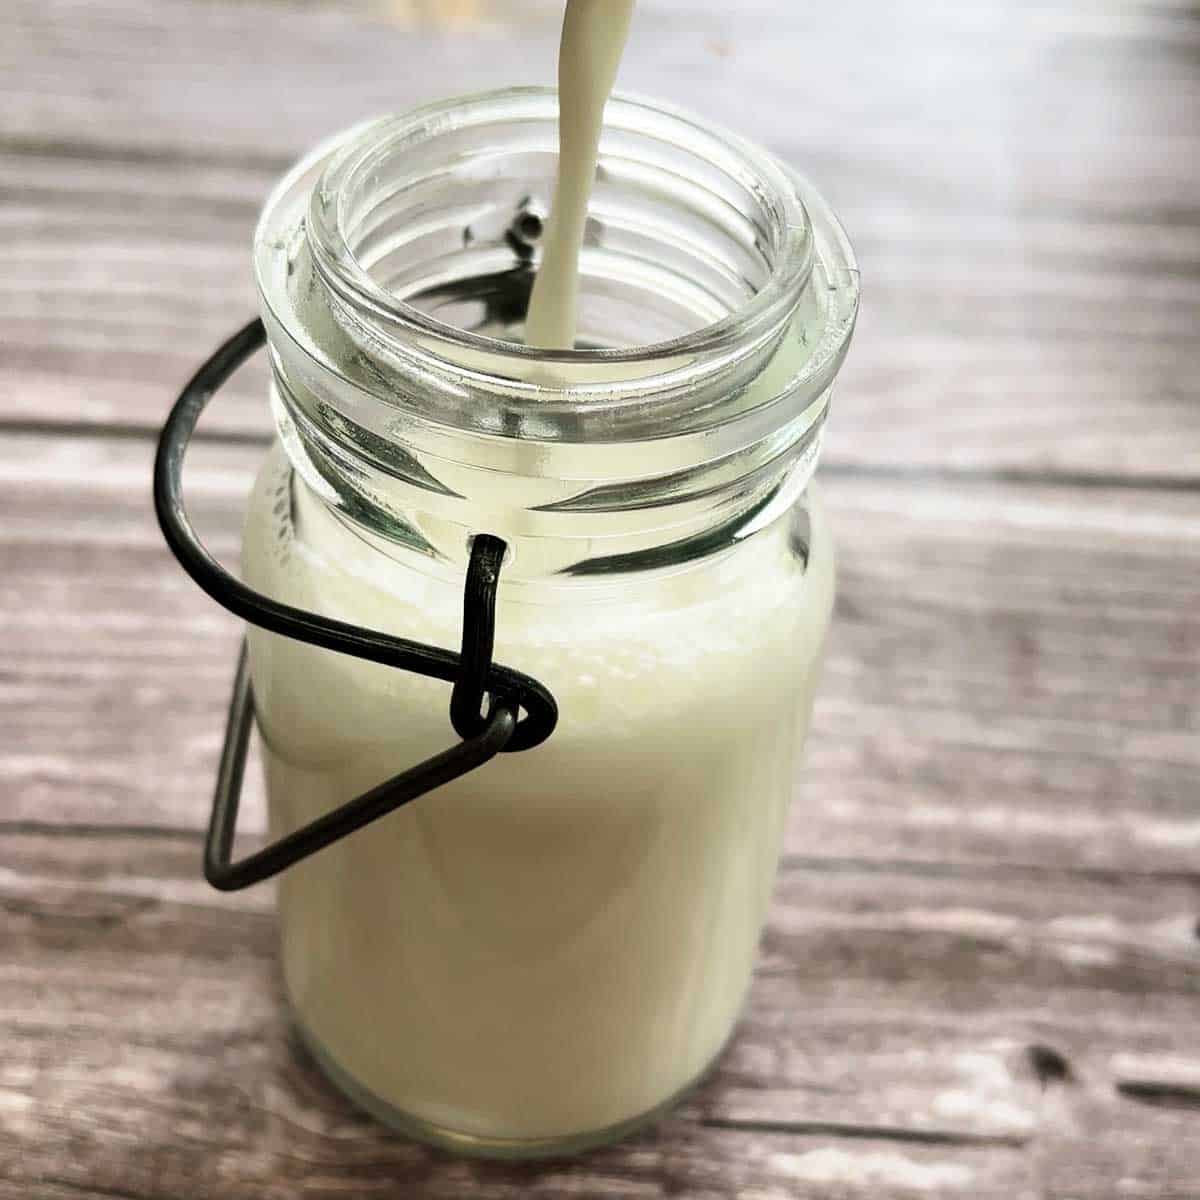 pouring buttermilk into a jar